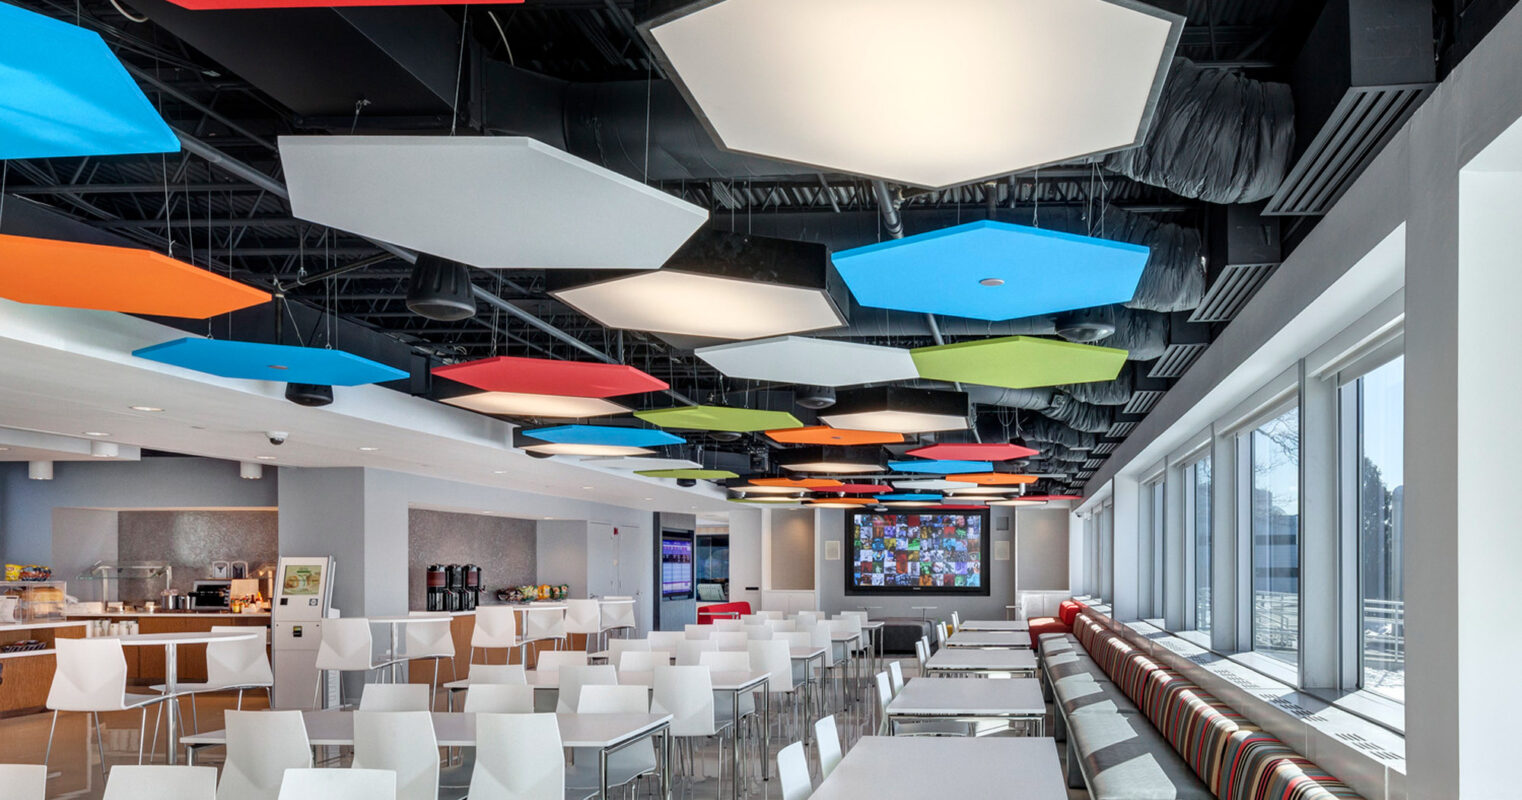 Vibrantly colored geometric acoustic panels are suspended from an exposed ceiling over a modern cafeteria space, complemented by a variety of seating options and natural light from floor-to-ceiling windows.